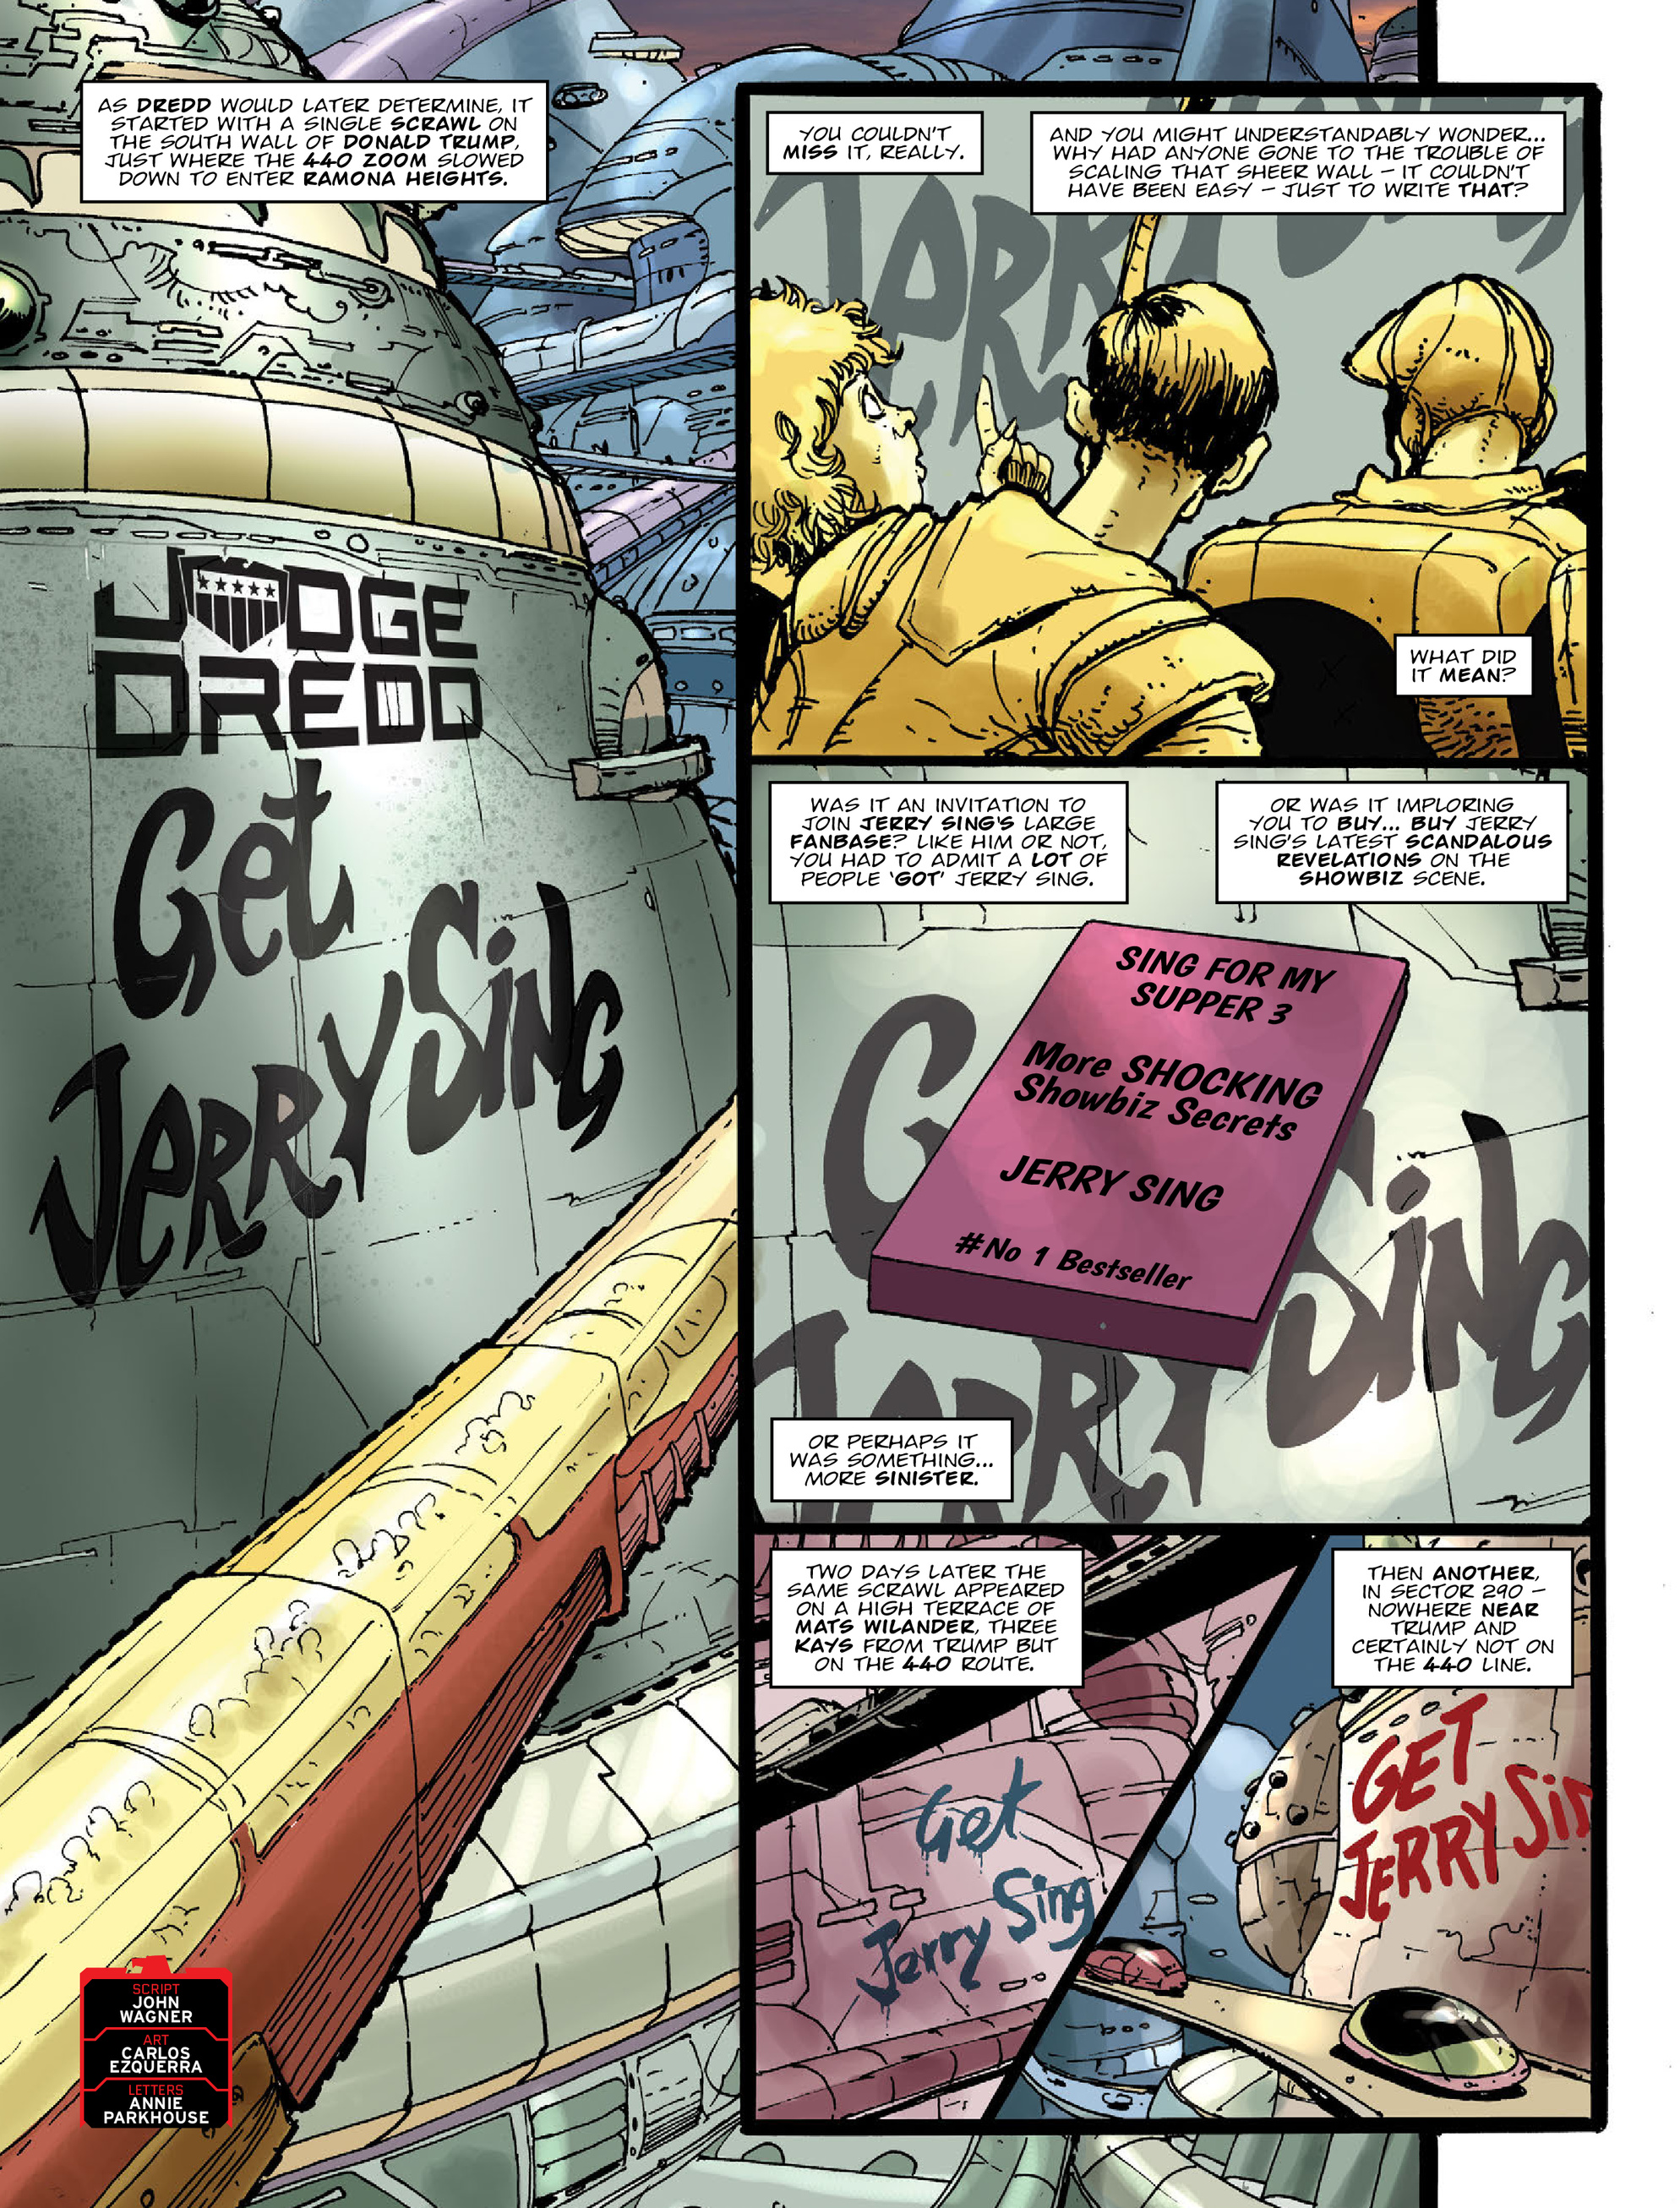 2000 AD: Chapter 2023 - Page 3